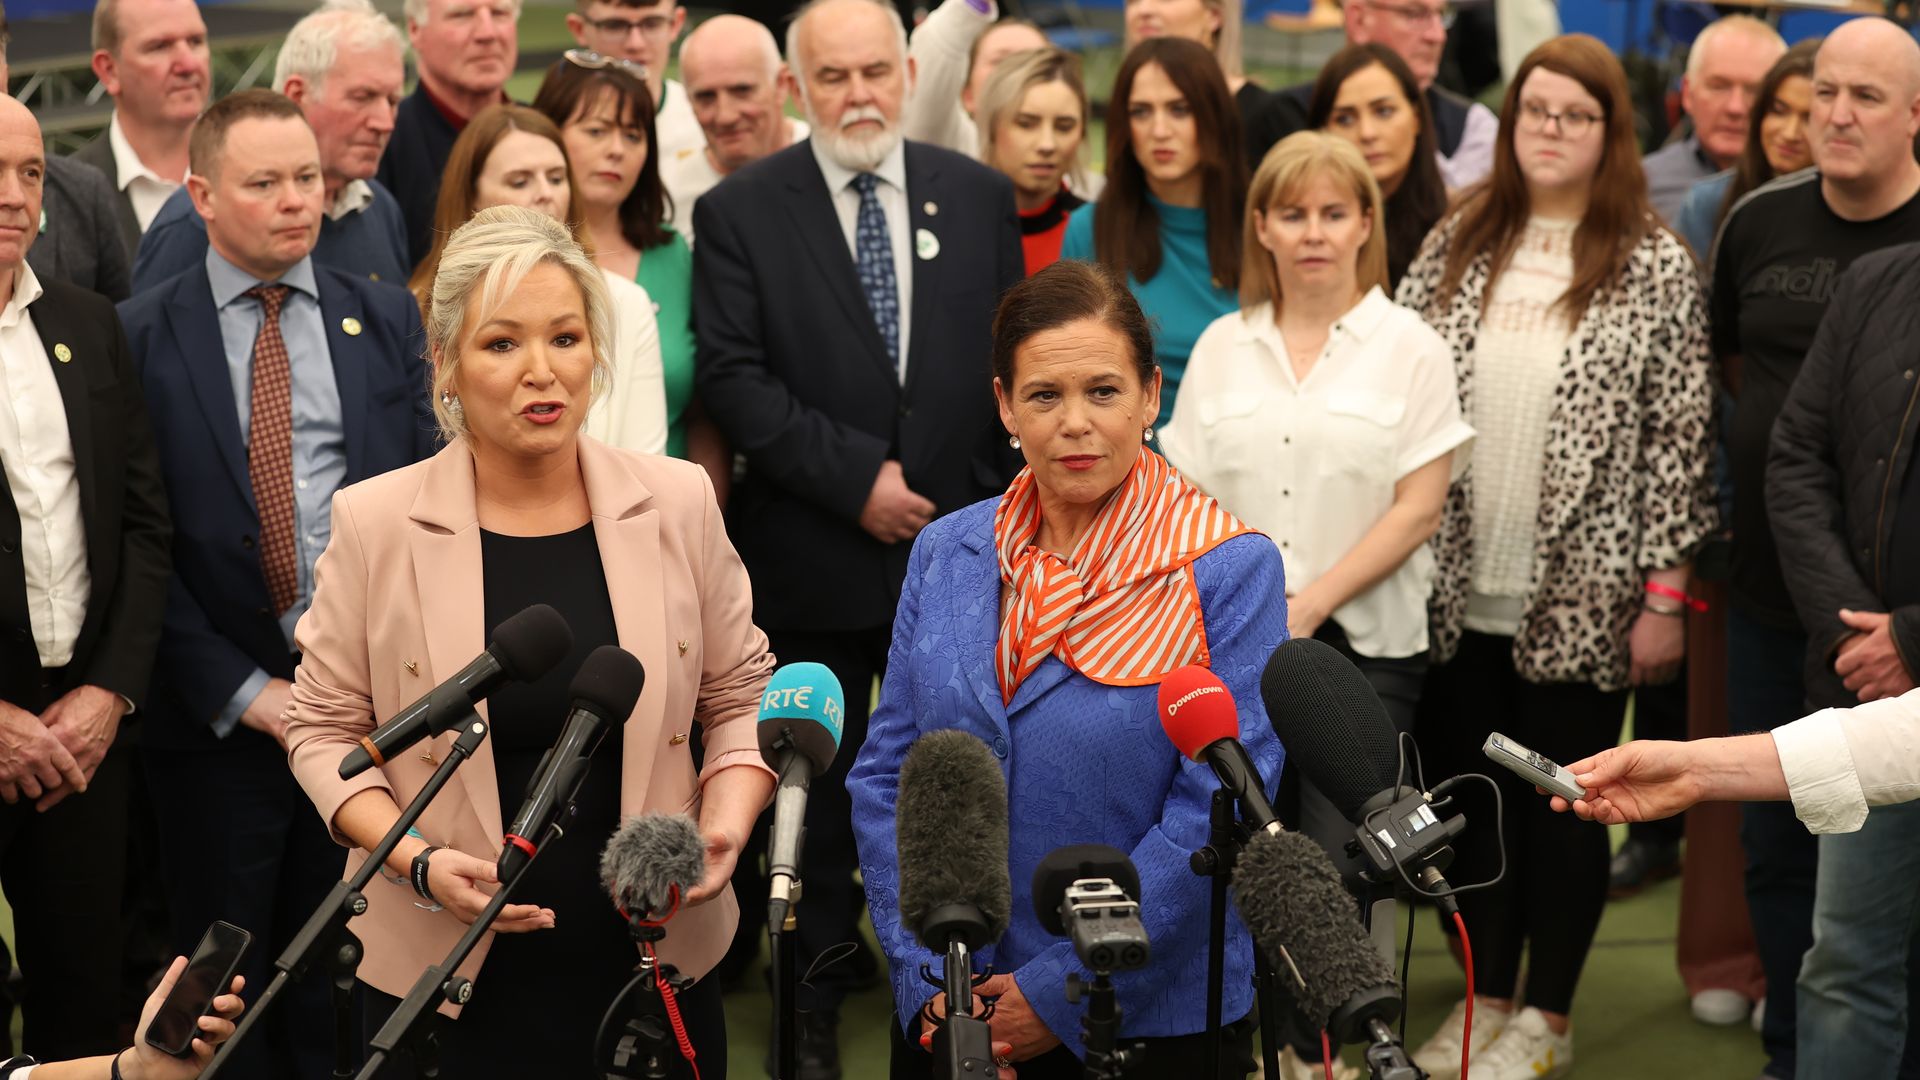 Sinn Fein deputy leader Michelle O'Neill (left) and party leader Mary Louise McDonald (right) at the Meadowbank Sports Arena count centre, in Magherafelt, Northern Ireland, on May 7.